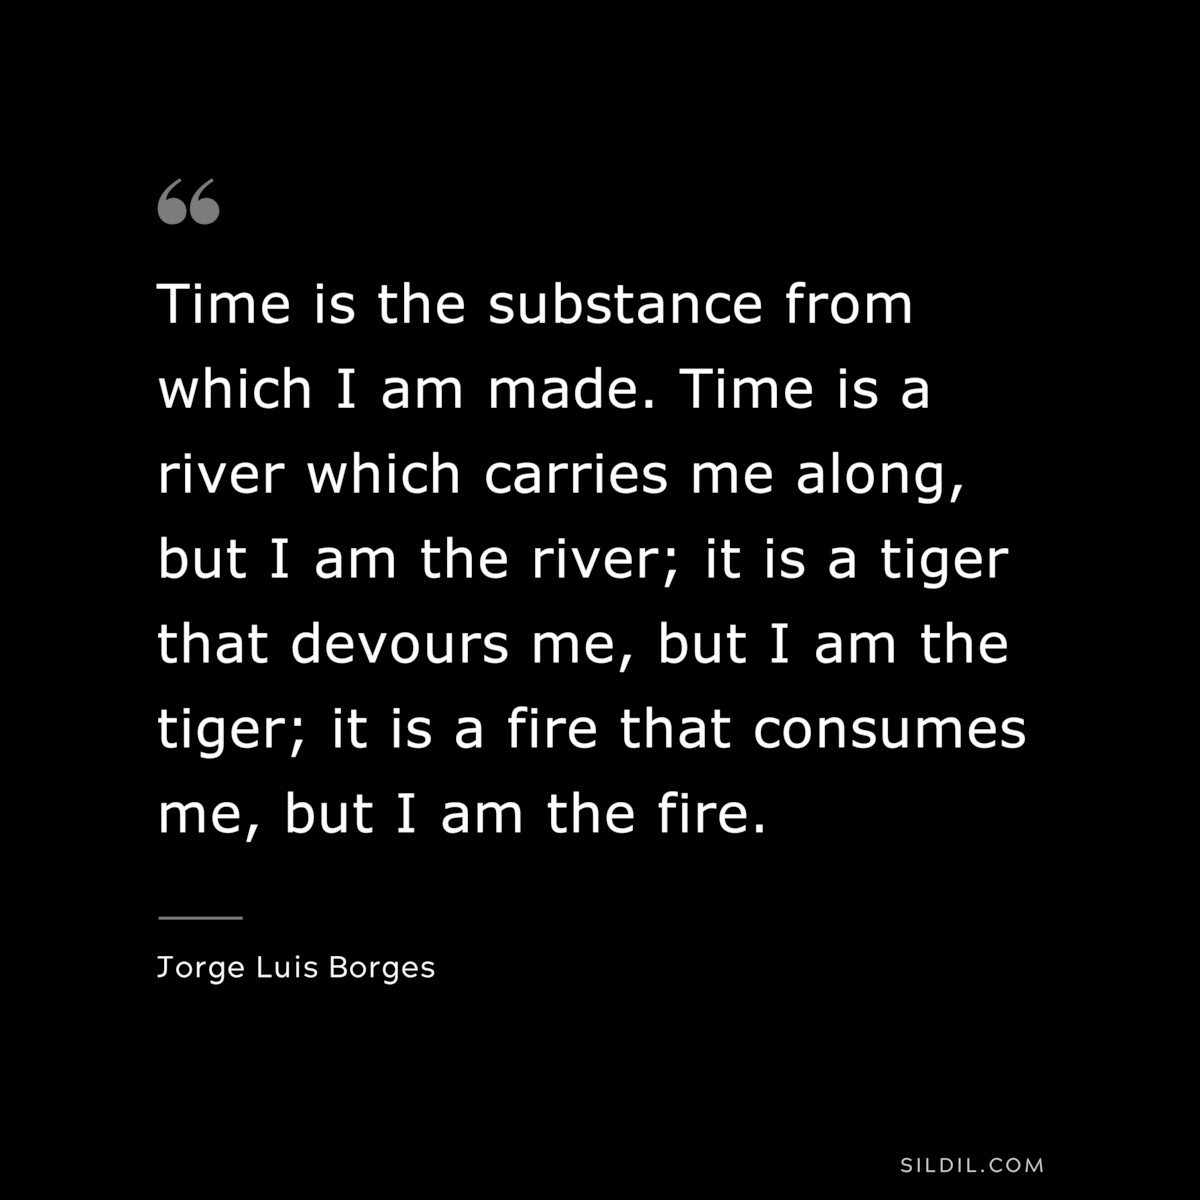 Time is the substance from which I am made. Time is a river which carries me along, but I am the river; it is a tiger that devours me, but I am the tiger; it is a fire that consumes me, but I am the fire. ― Jorge Luis Borges